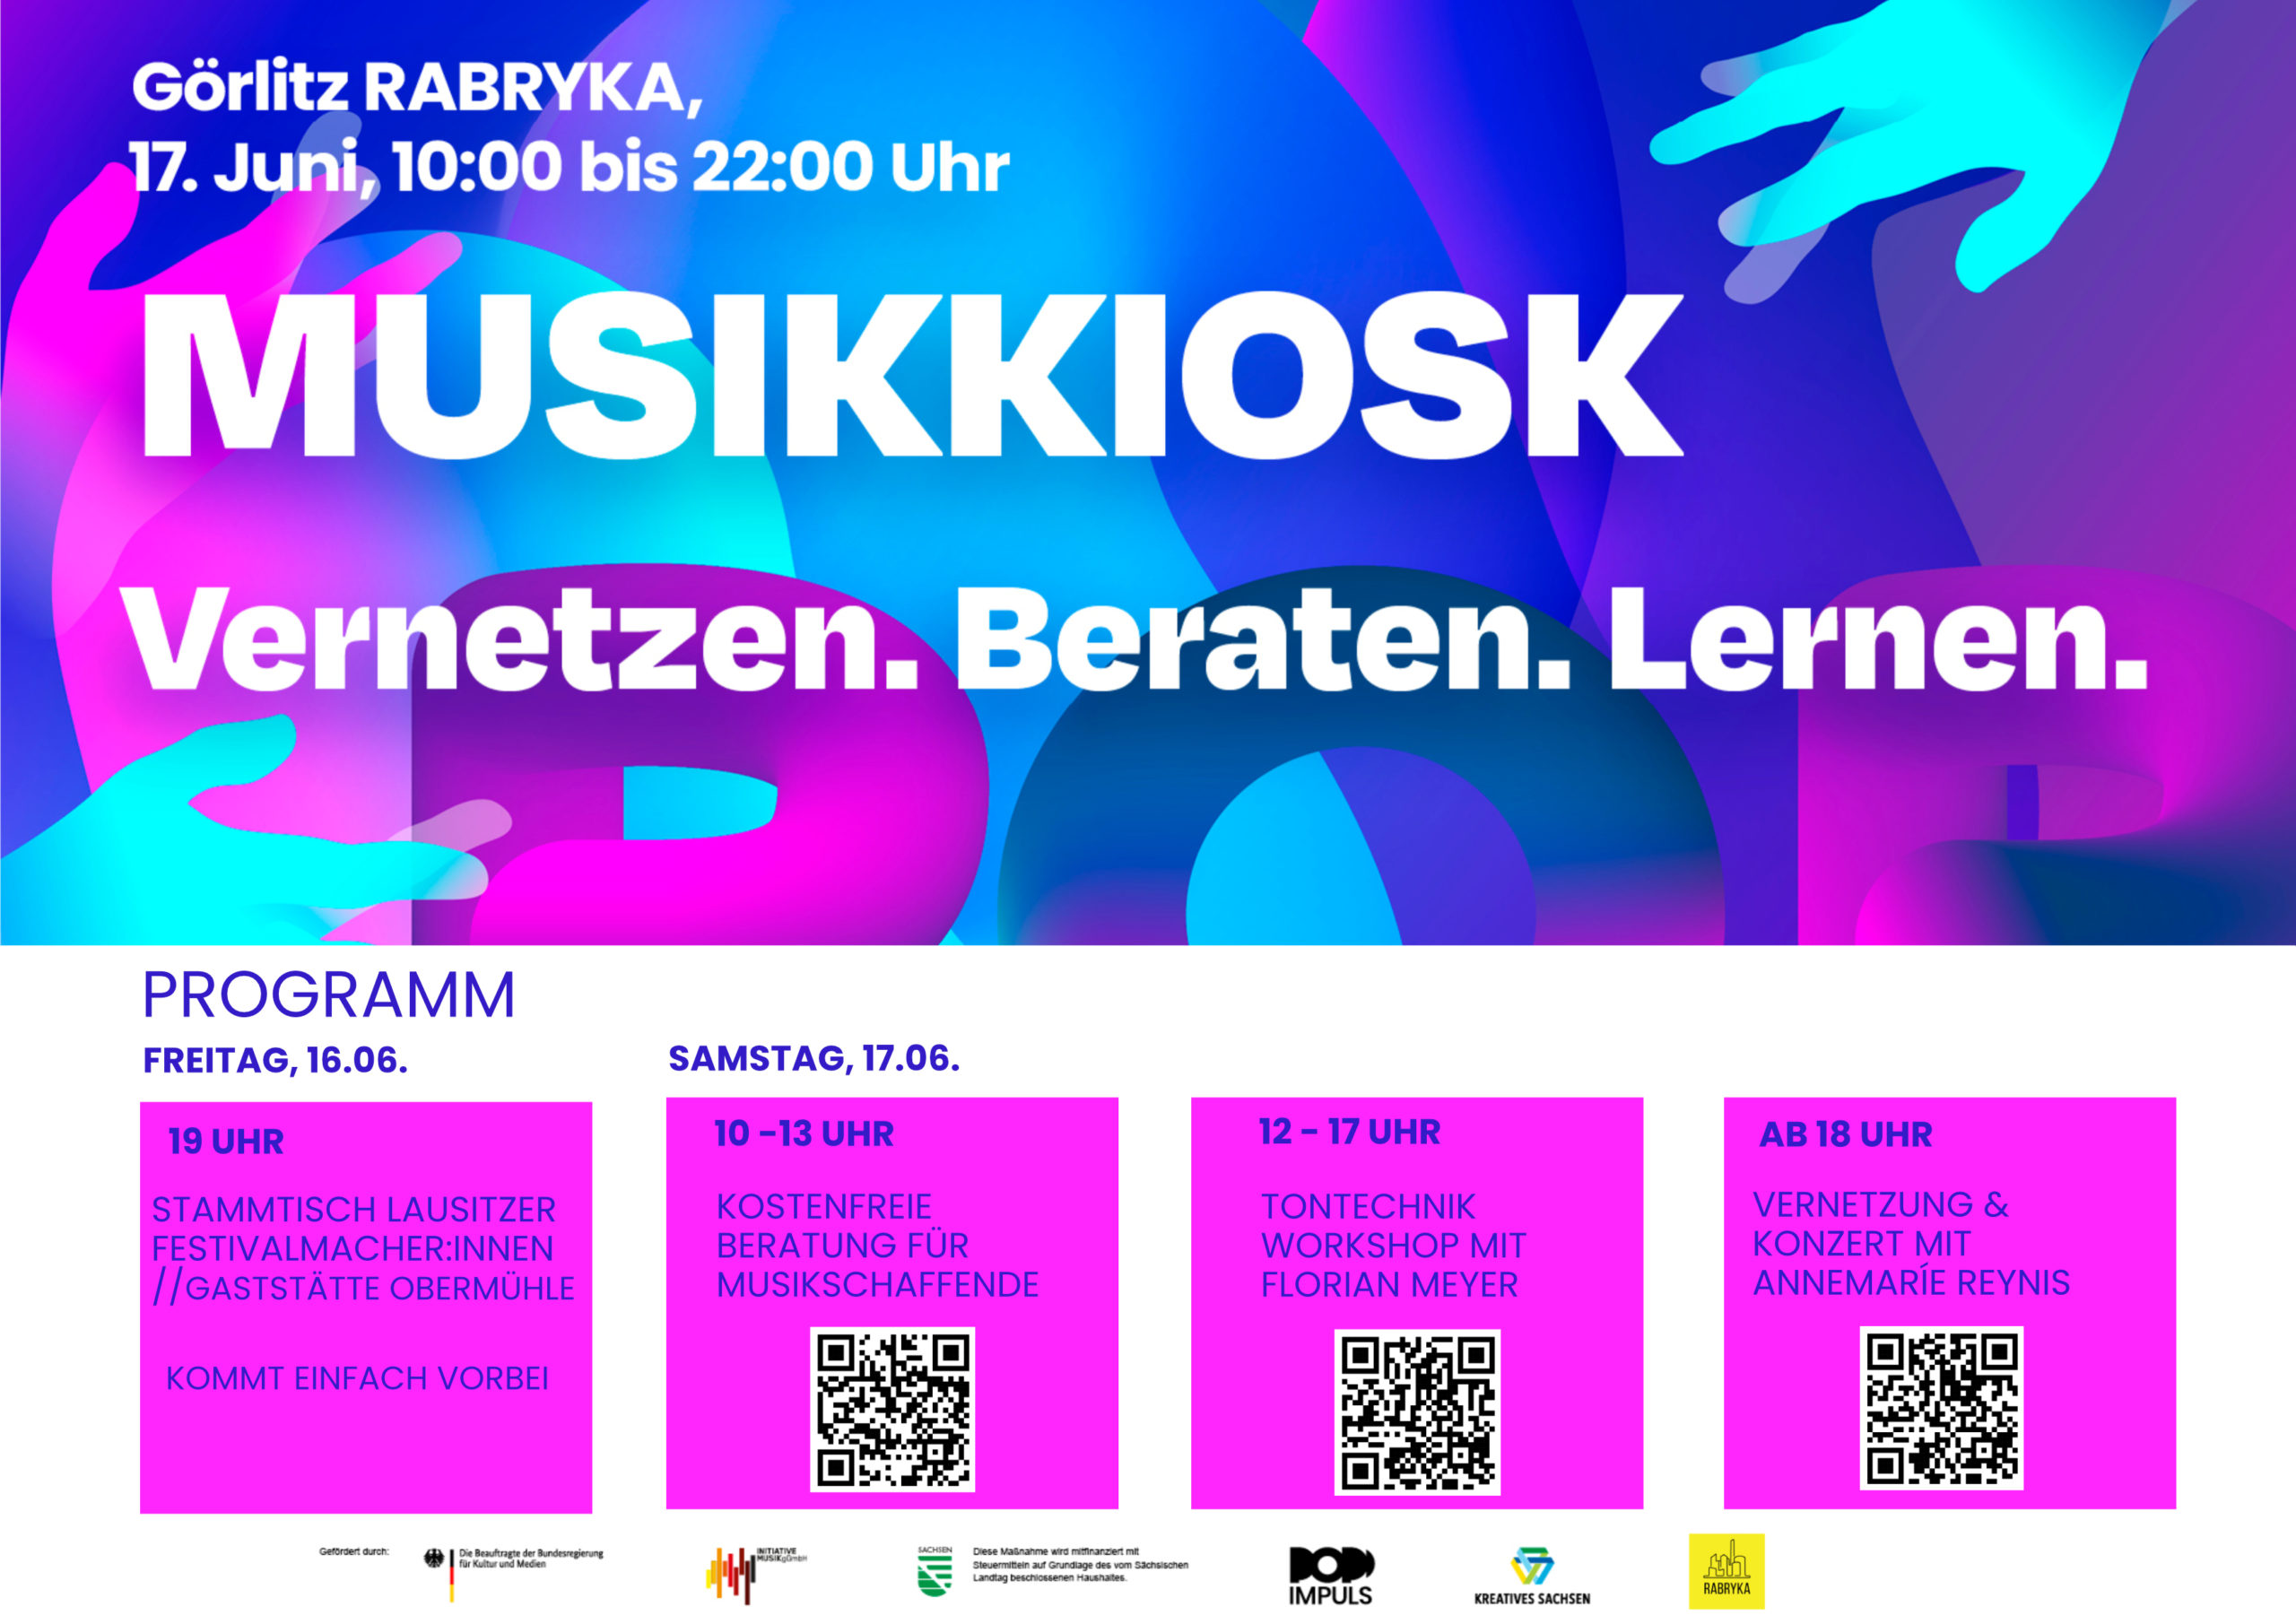 You are currently viewing Musikkiosk | 17.06. in der Rabryka